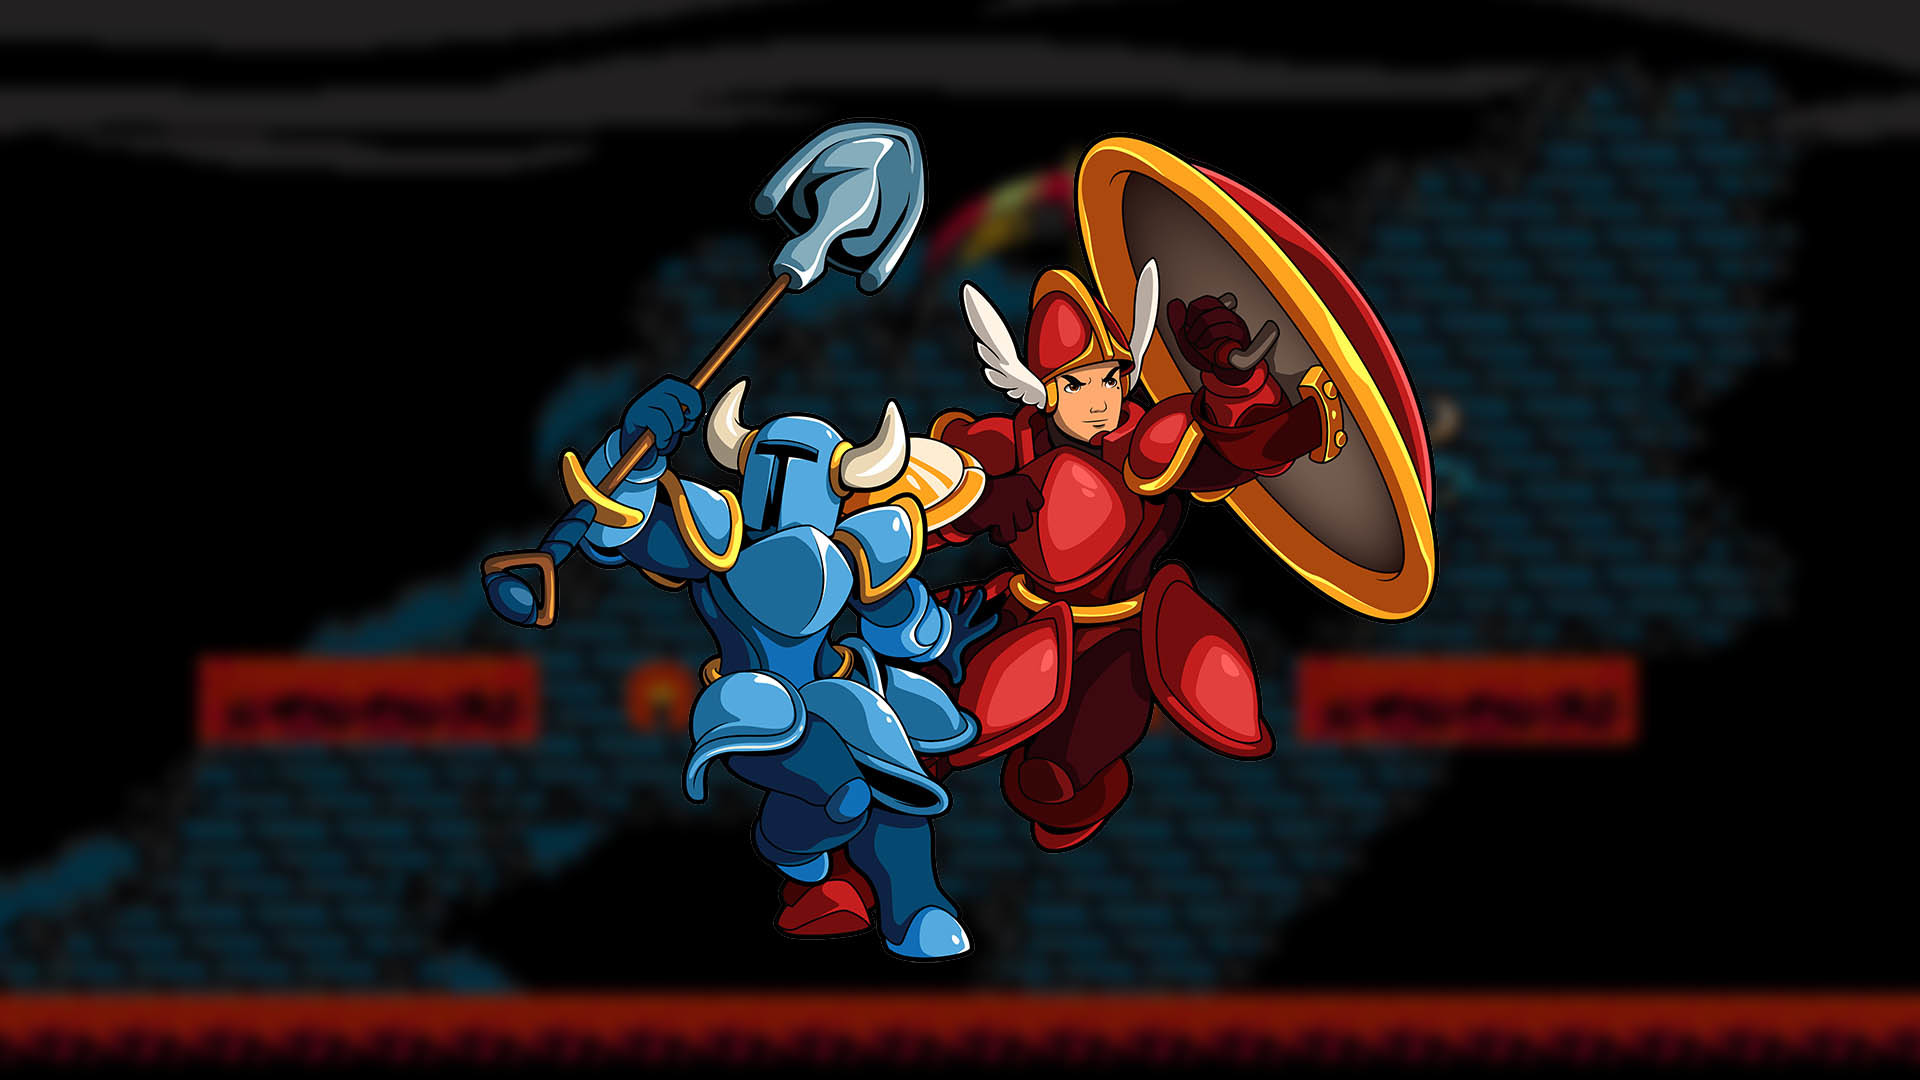 1920x1080 All Armor options for Shovel Knight.